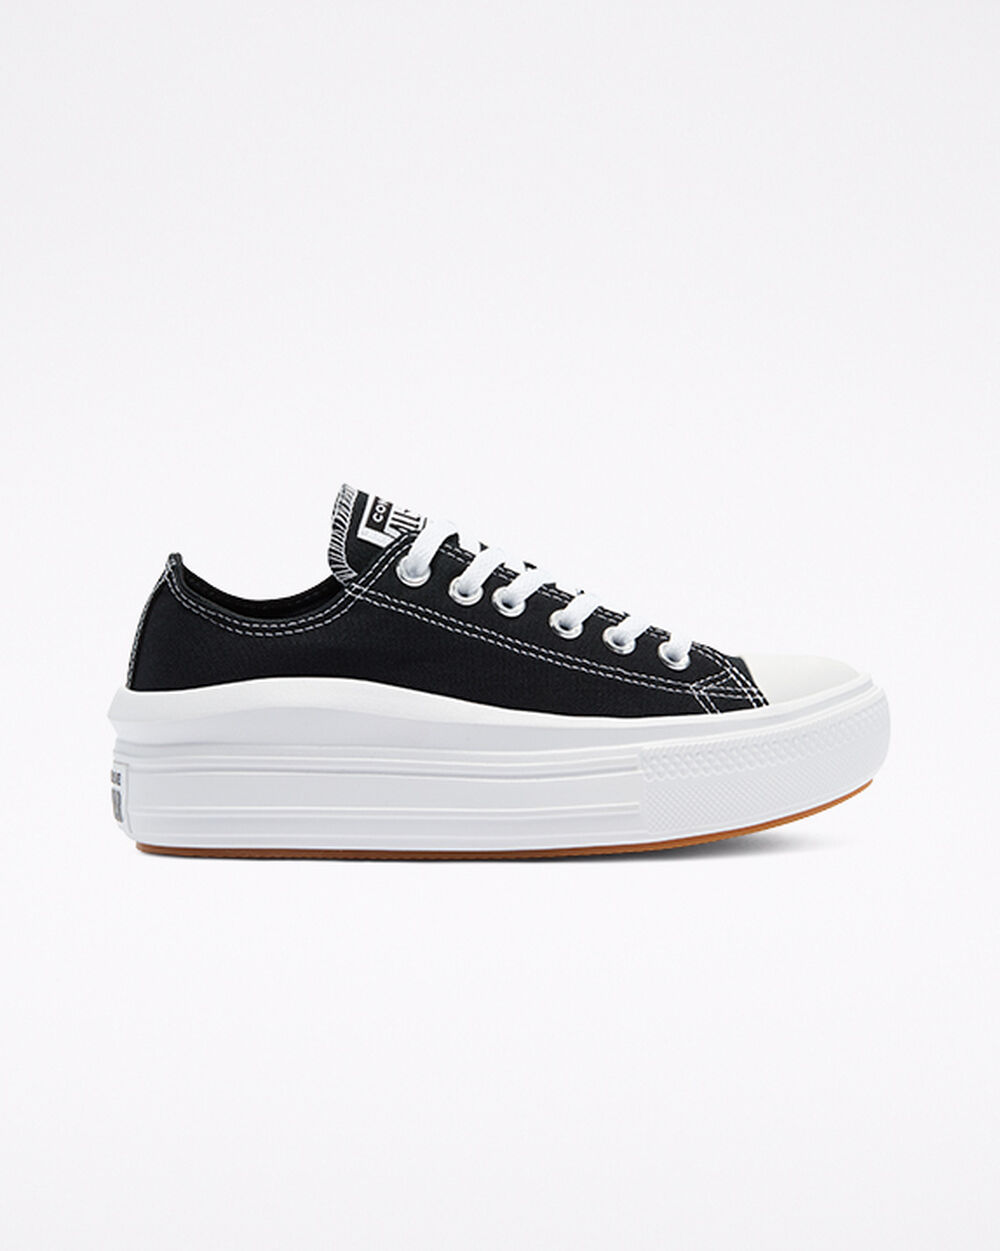 Tenis Converse Chuck Taylor All Star Move Mujer Negros Blancos | Mexico-75426